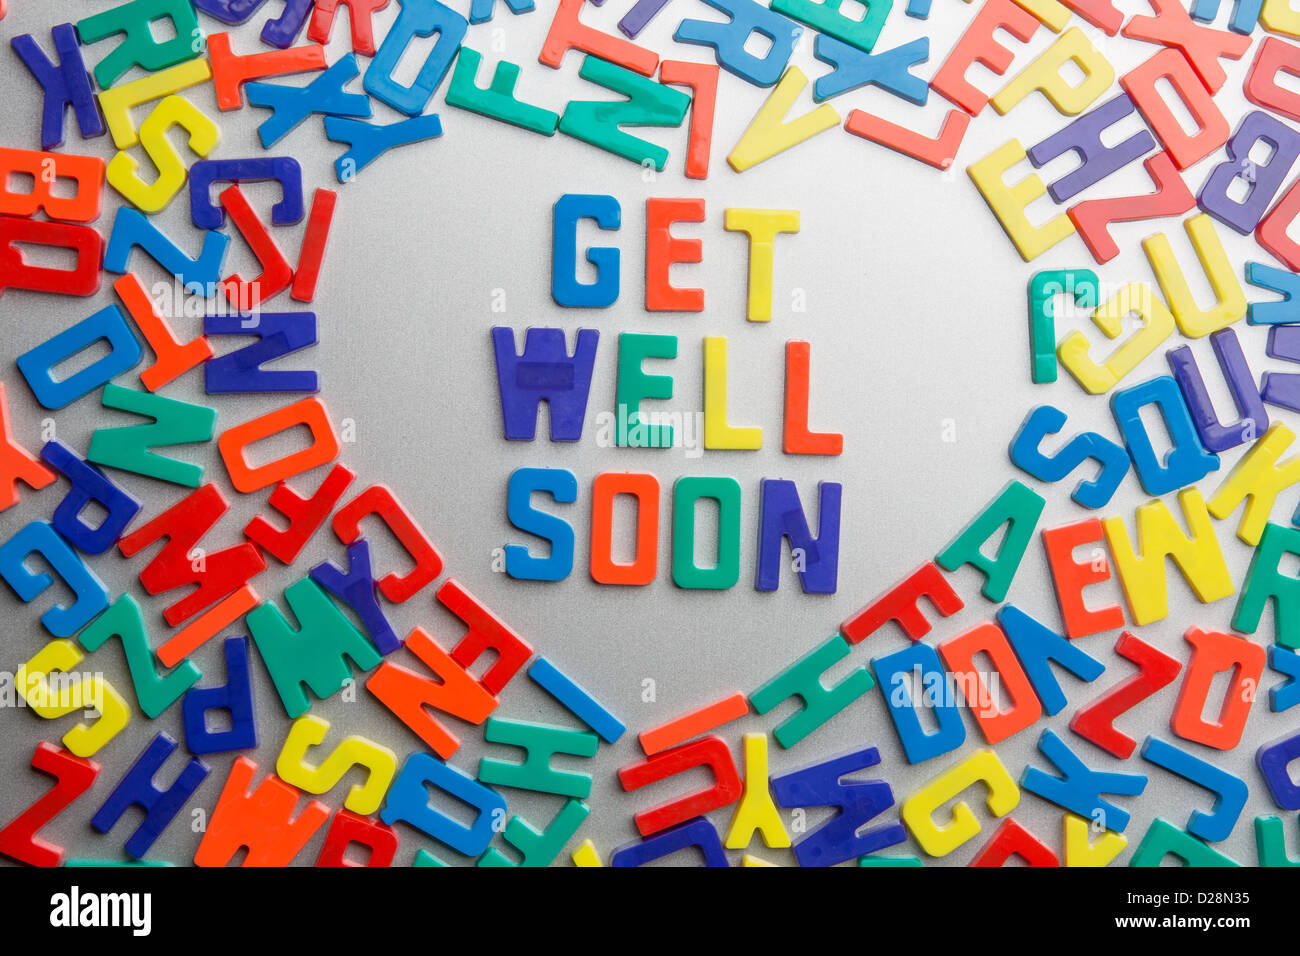 'Get Well Soon' - Refrigerator magnets spell a message out of a jumble of letters Stock Photo